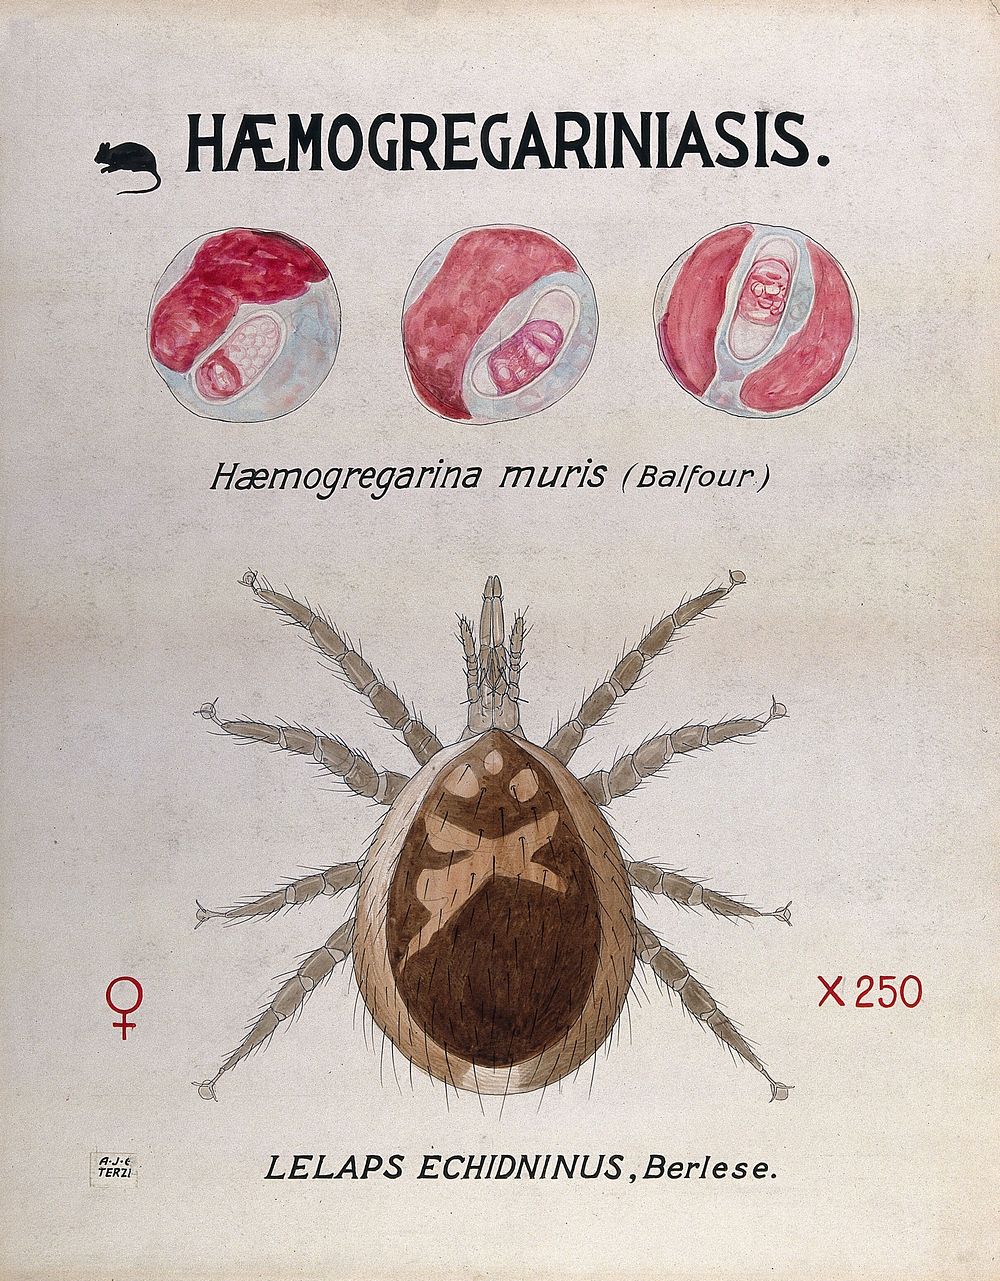 Life-cycle stages of the parasite Haemogregarina muris and its vector, the mite (Lelaps echidninus). Coloured drawing by…